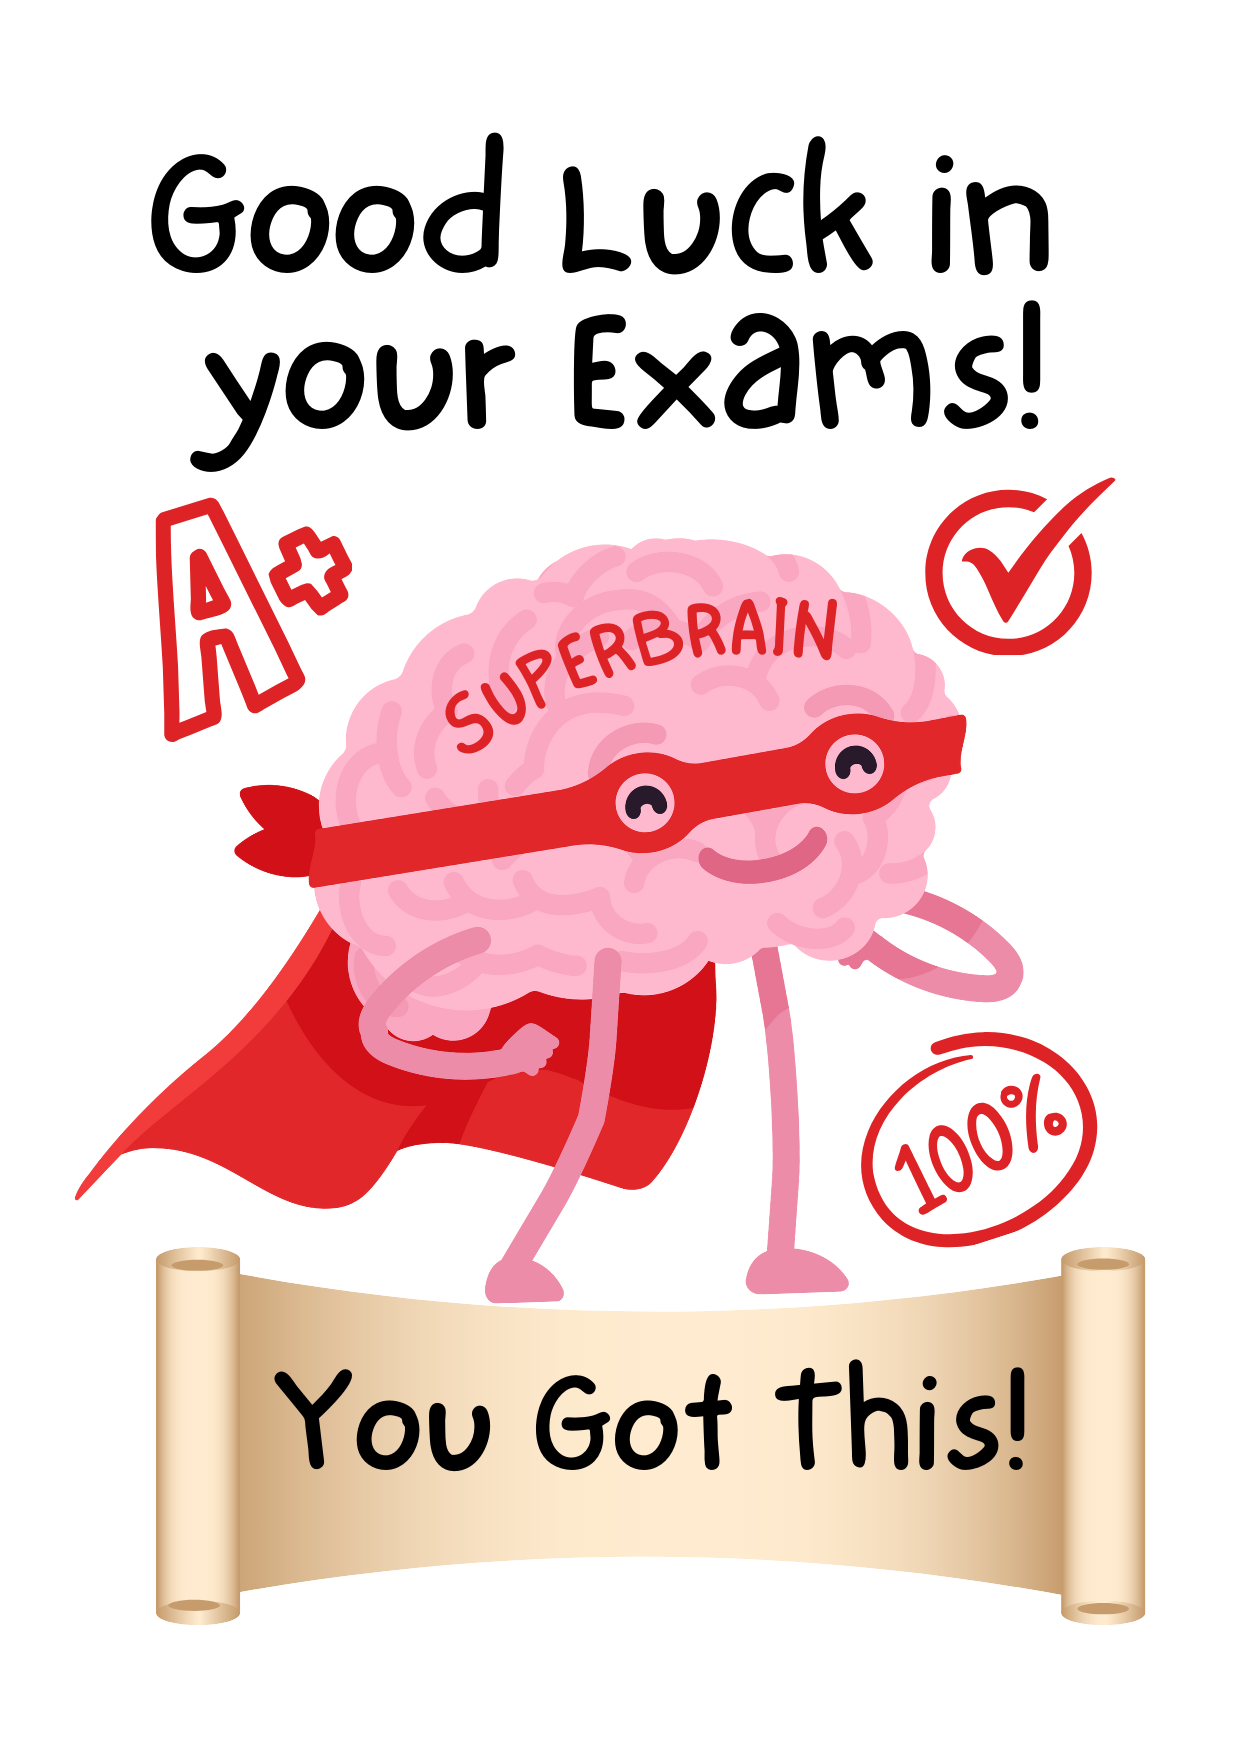 Good Luck in your Exams Greetings Card